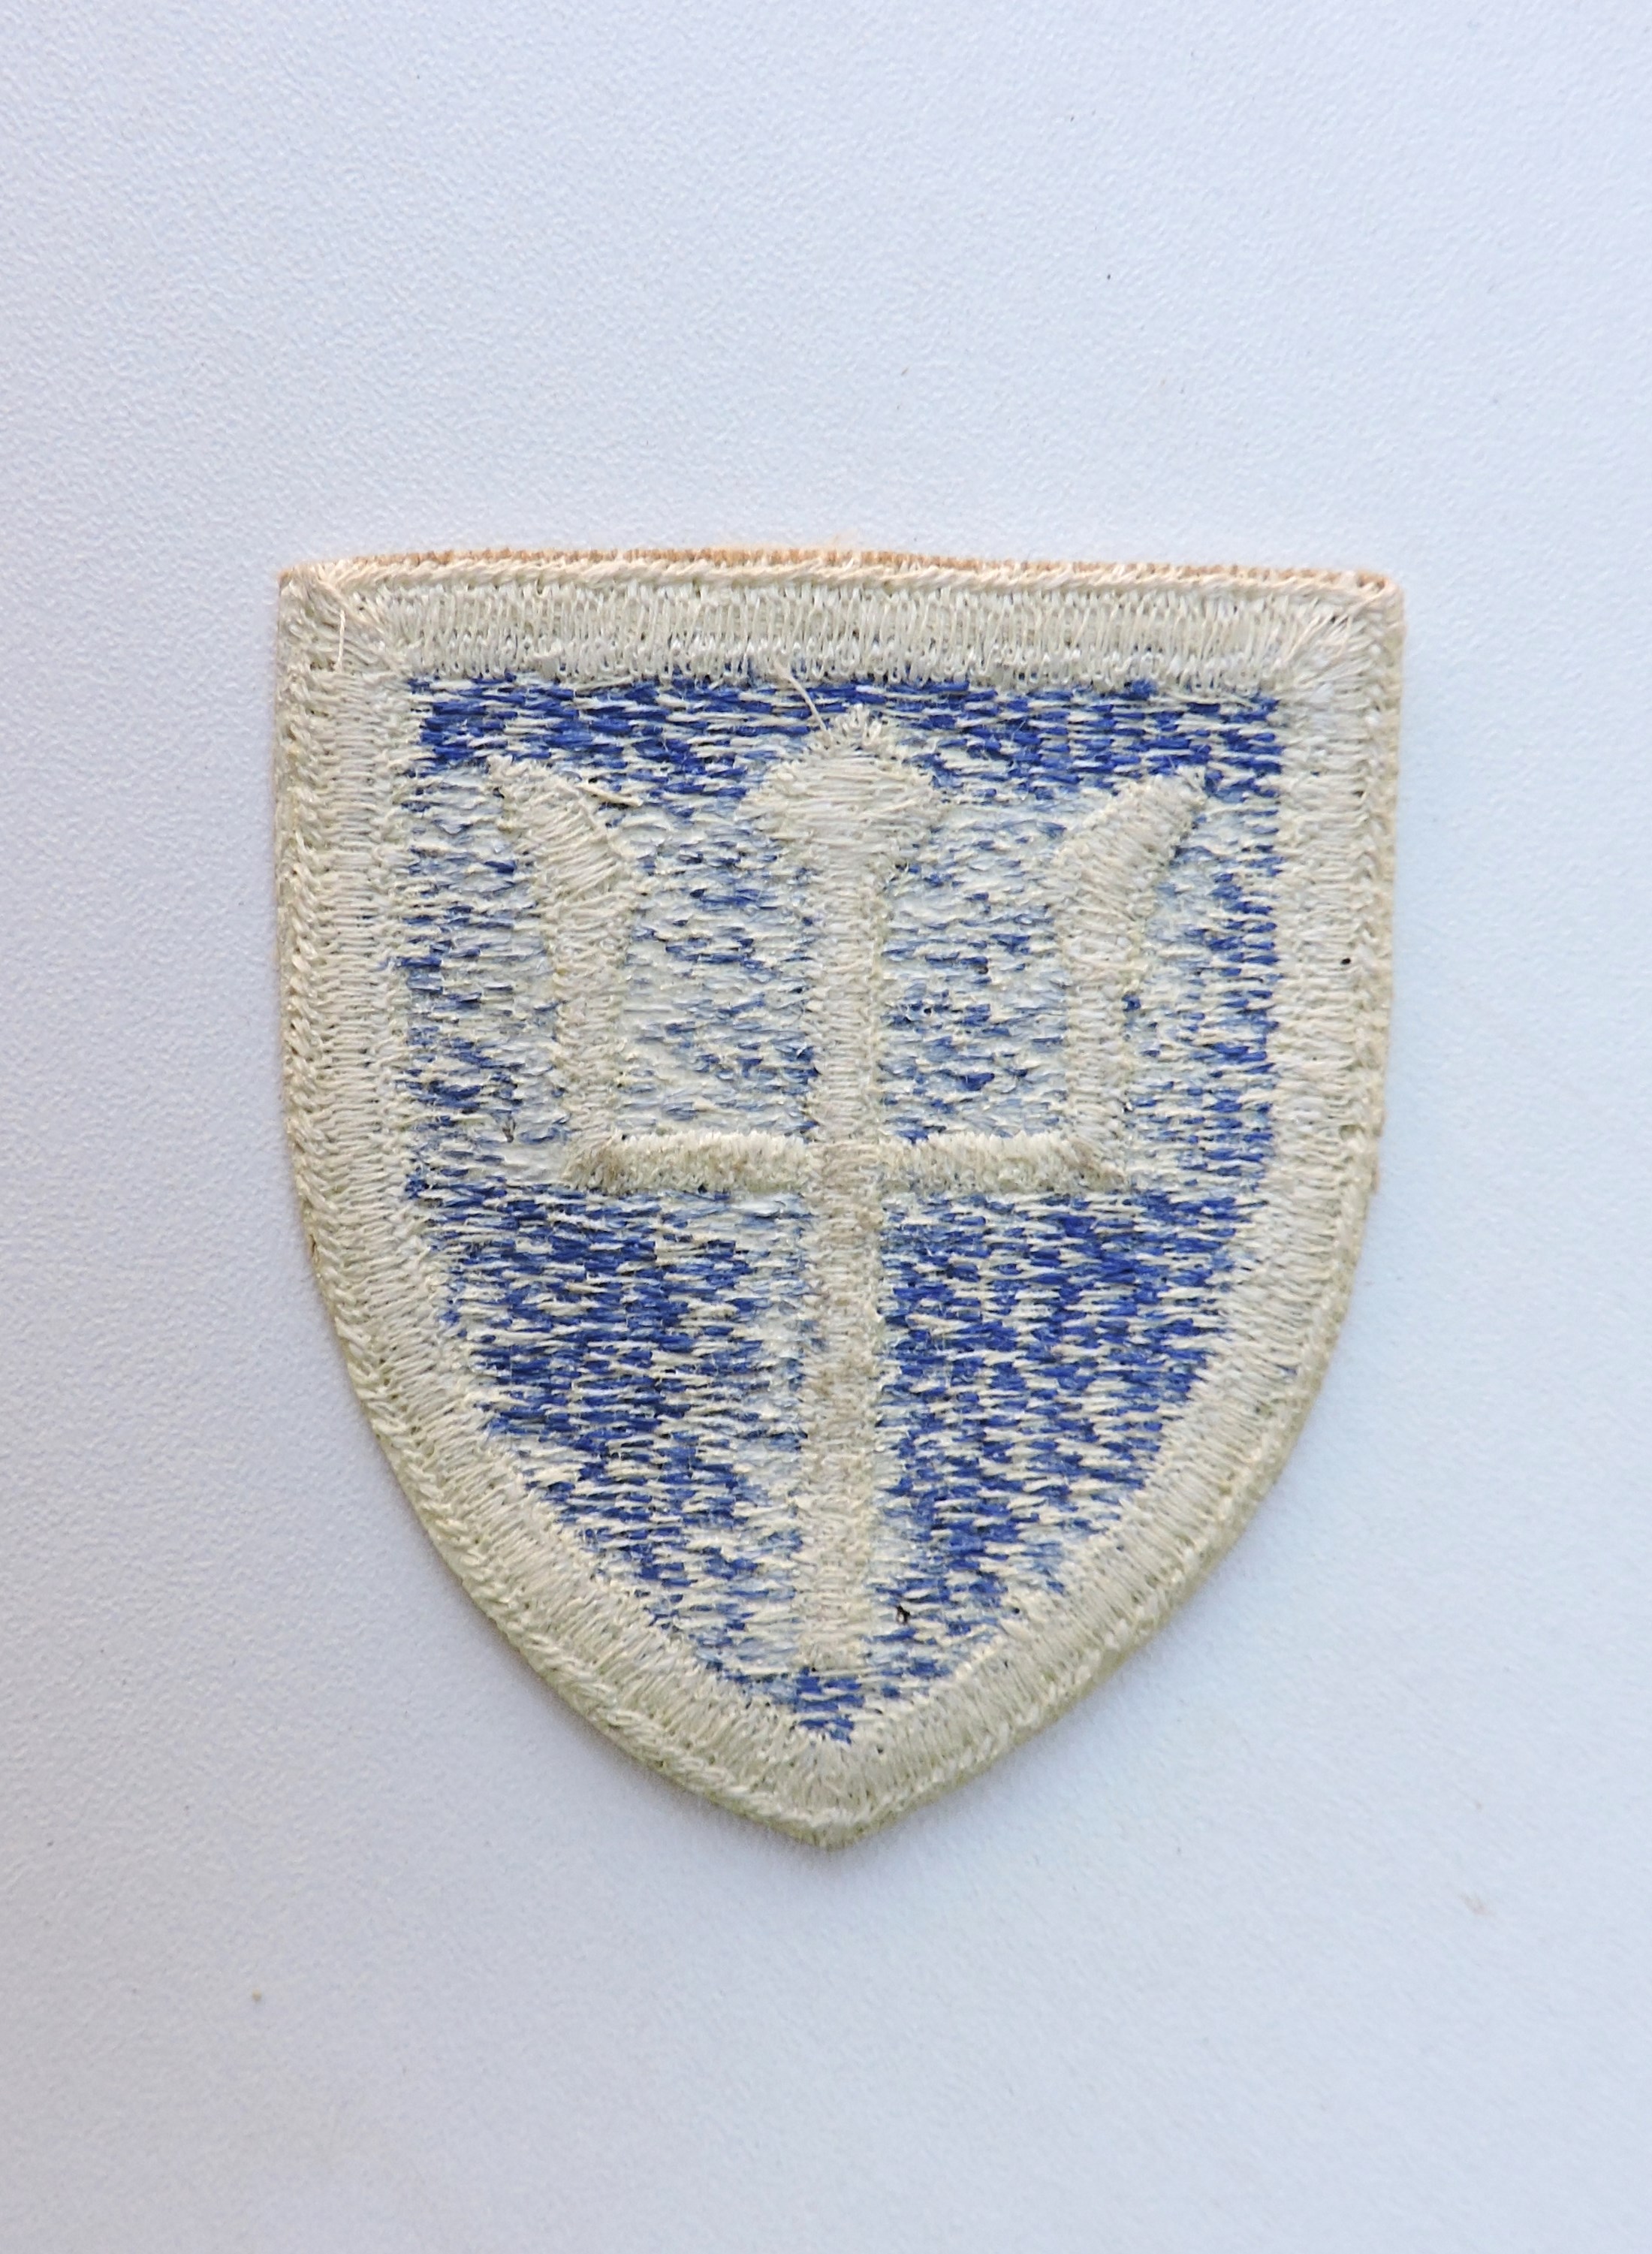 Patch US  97th infantry division